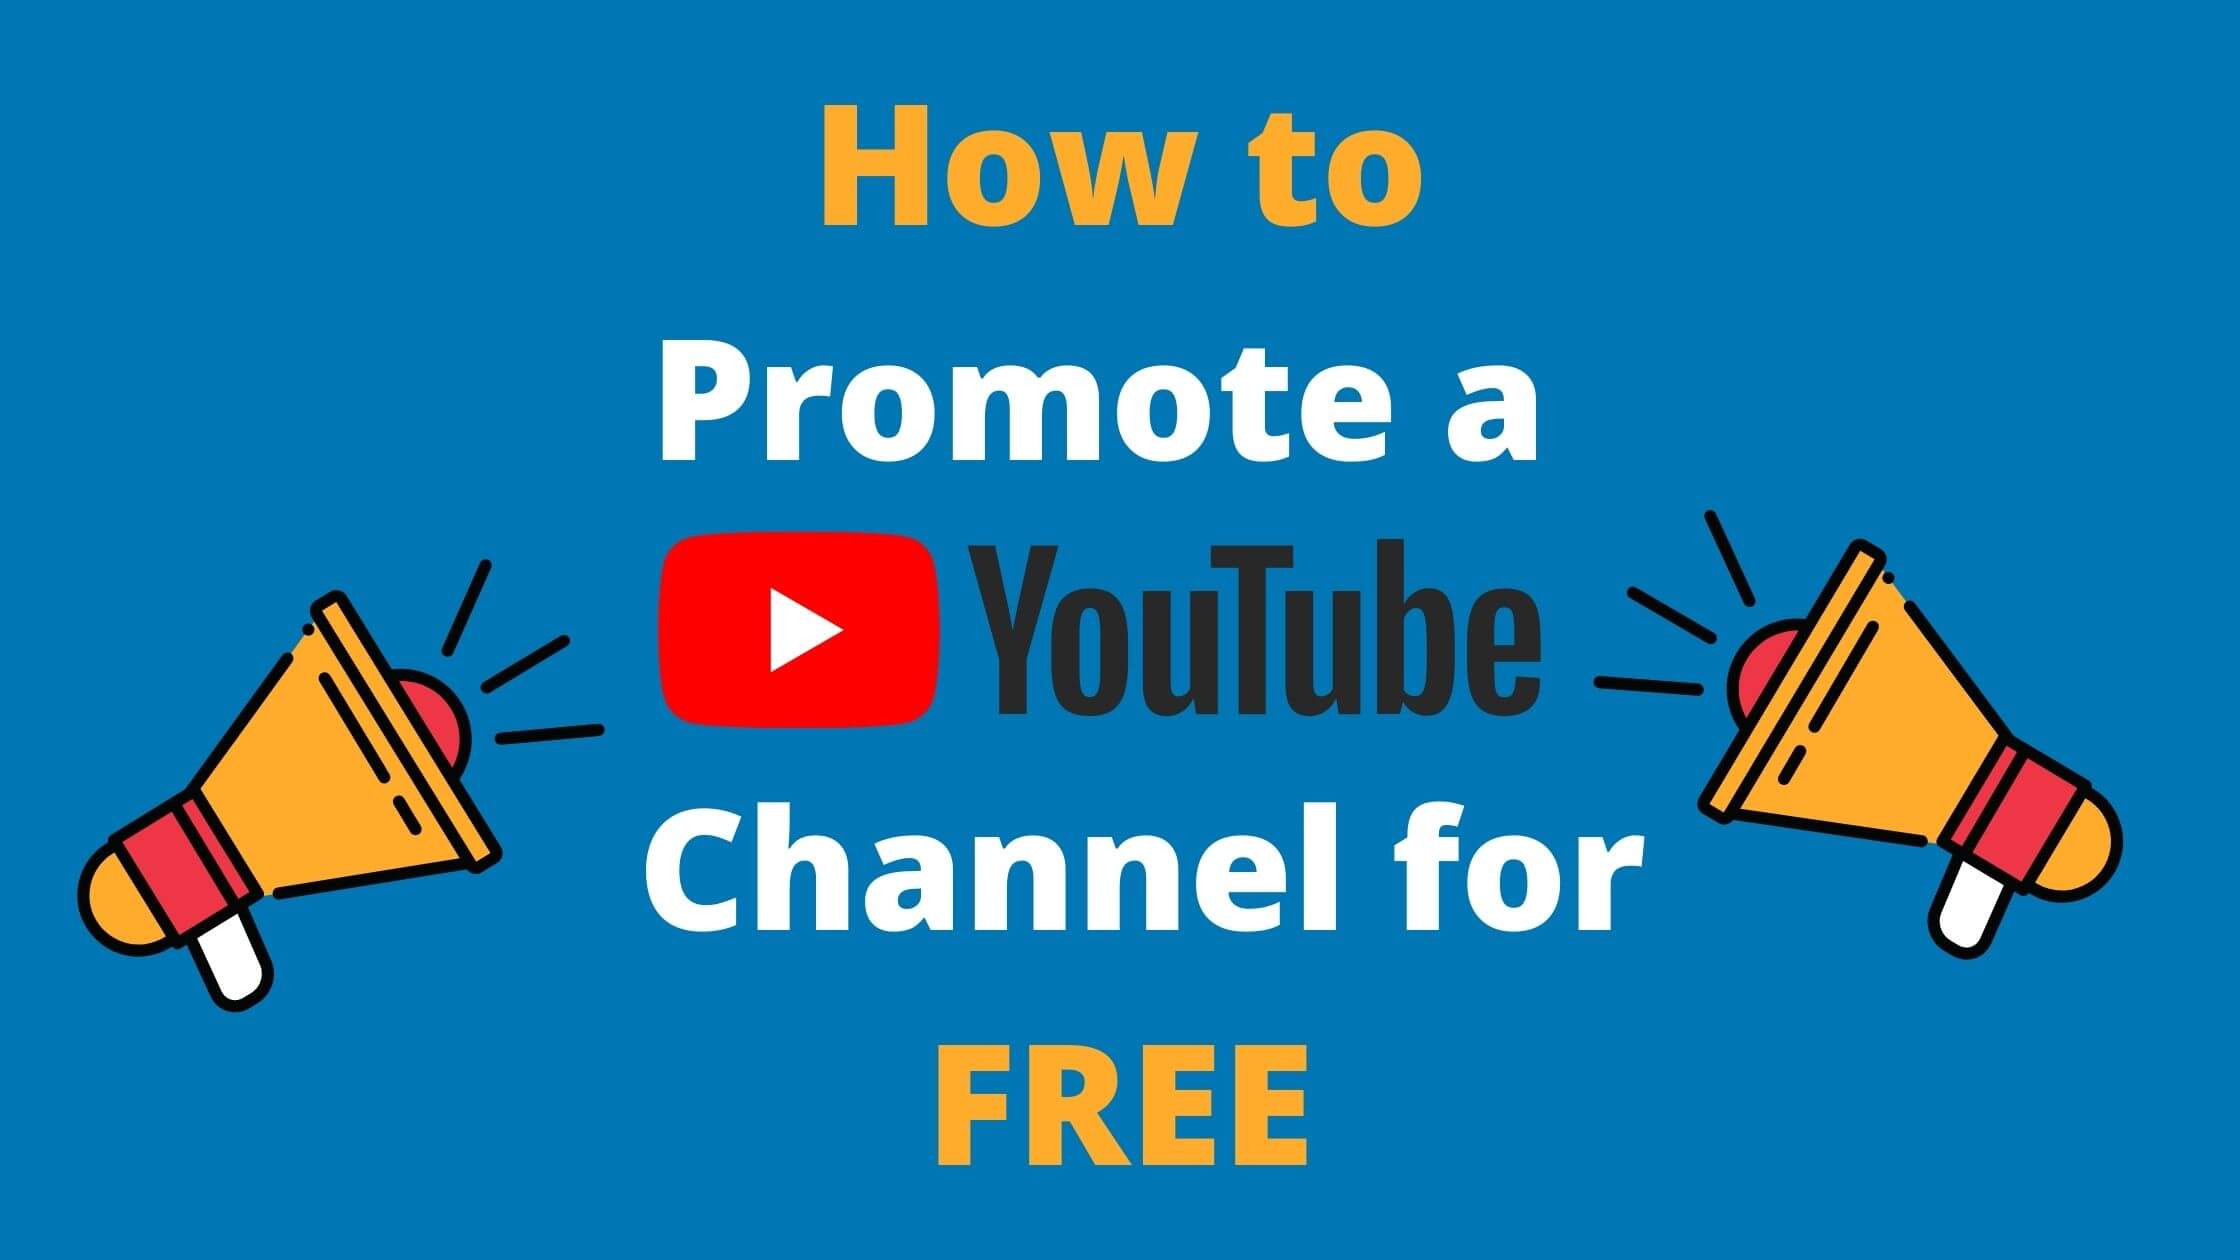 How to promote a YouTube channel for free